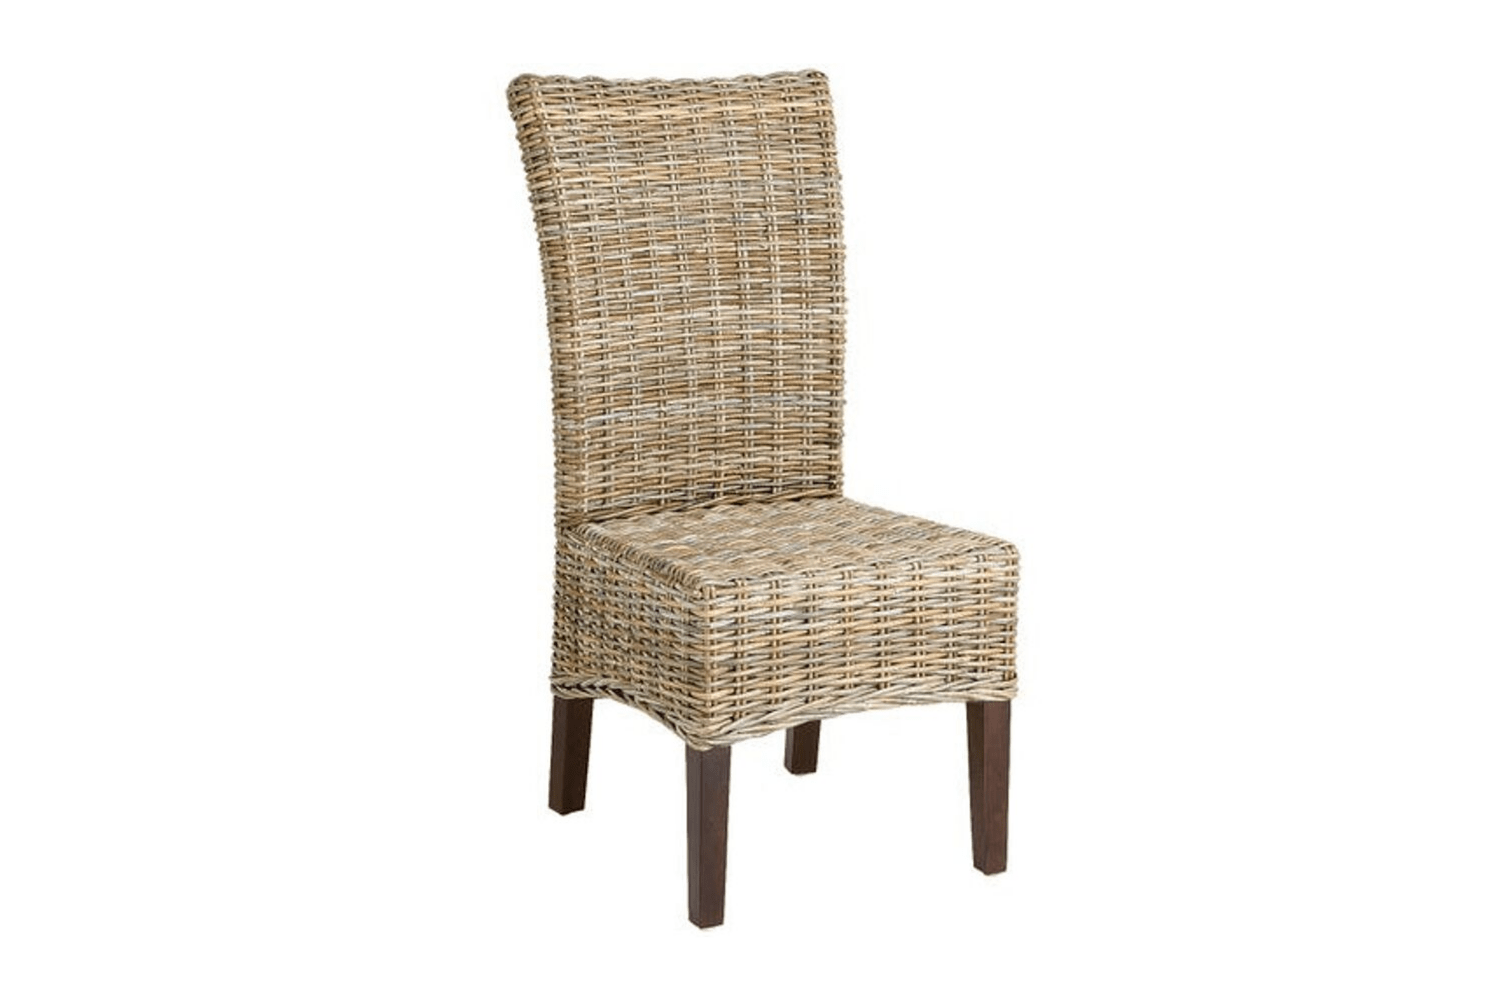 Pier One Dining Room Chair Reviews